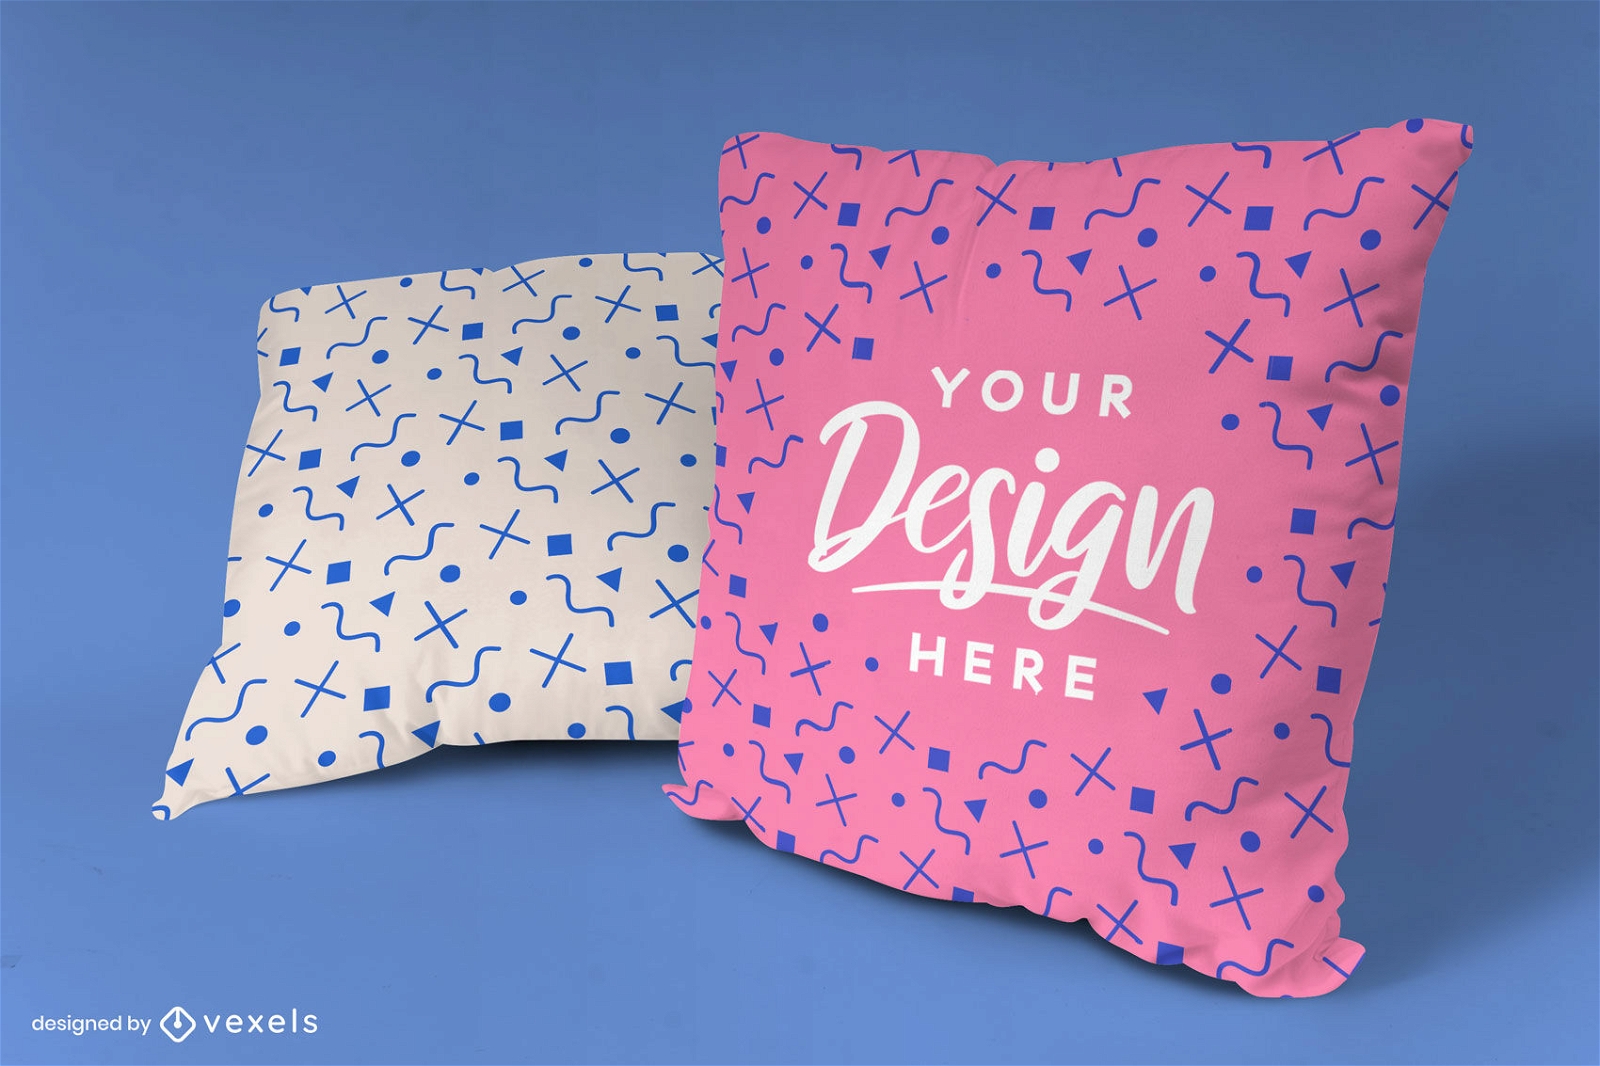 Double throw pillows on solid background mockup